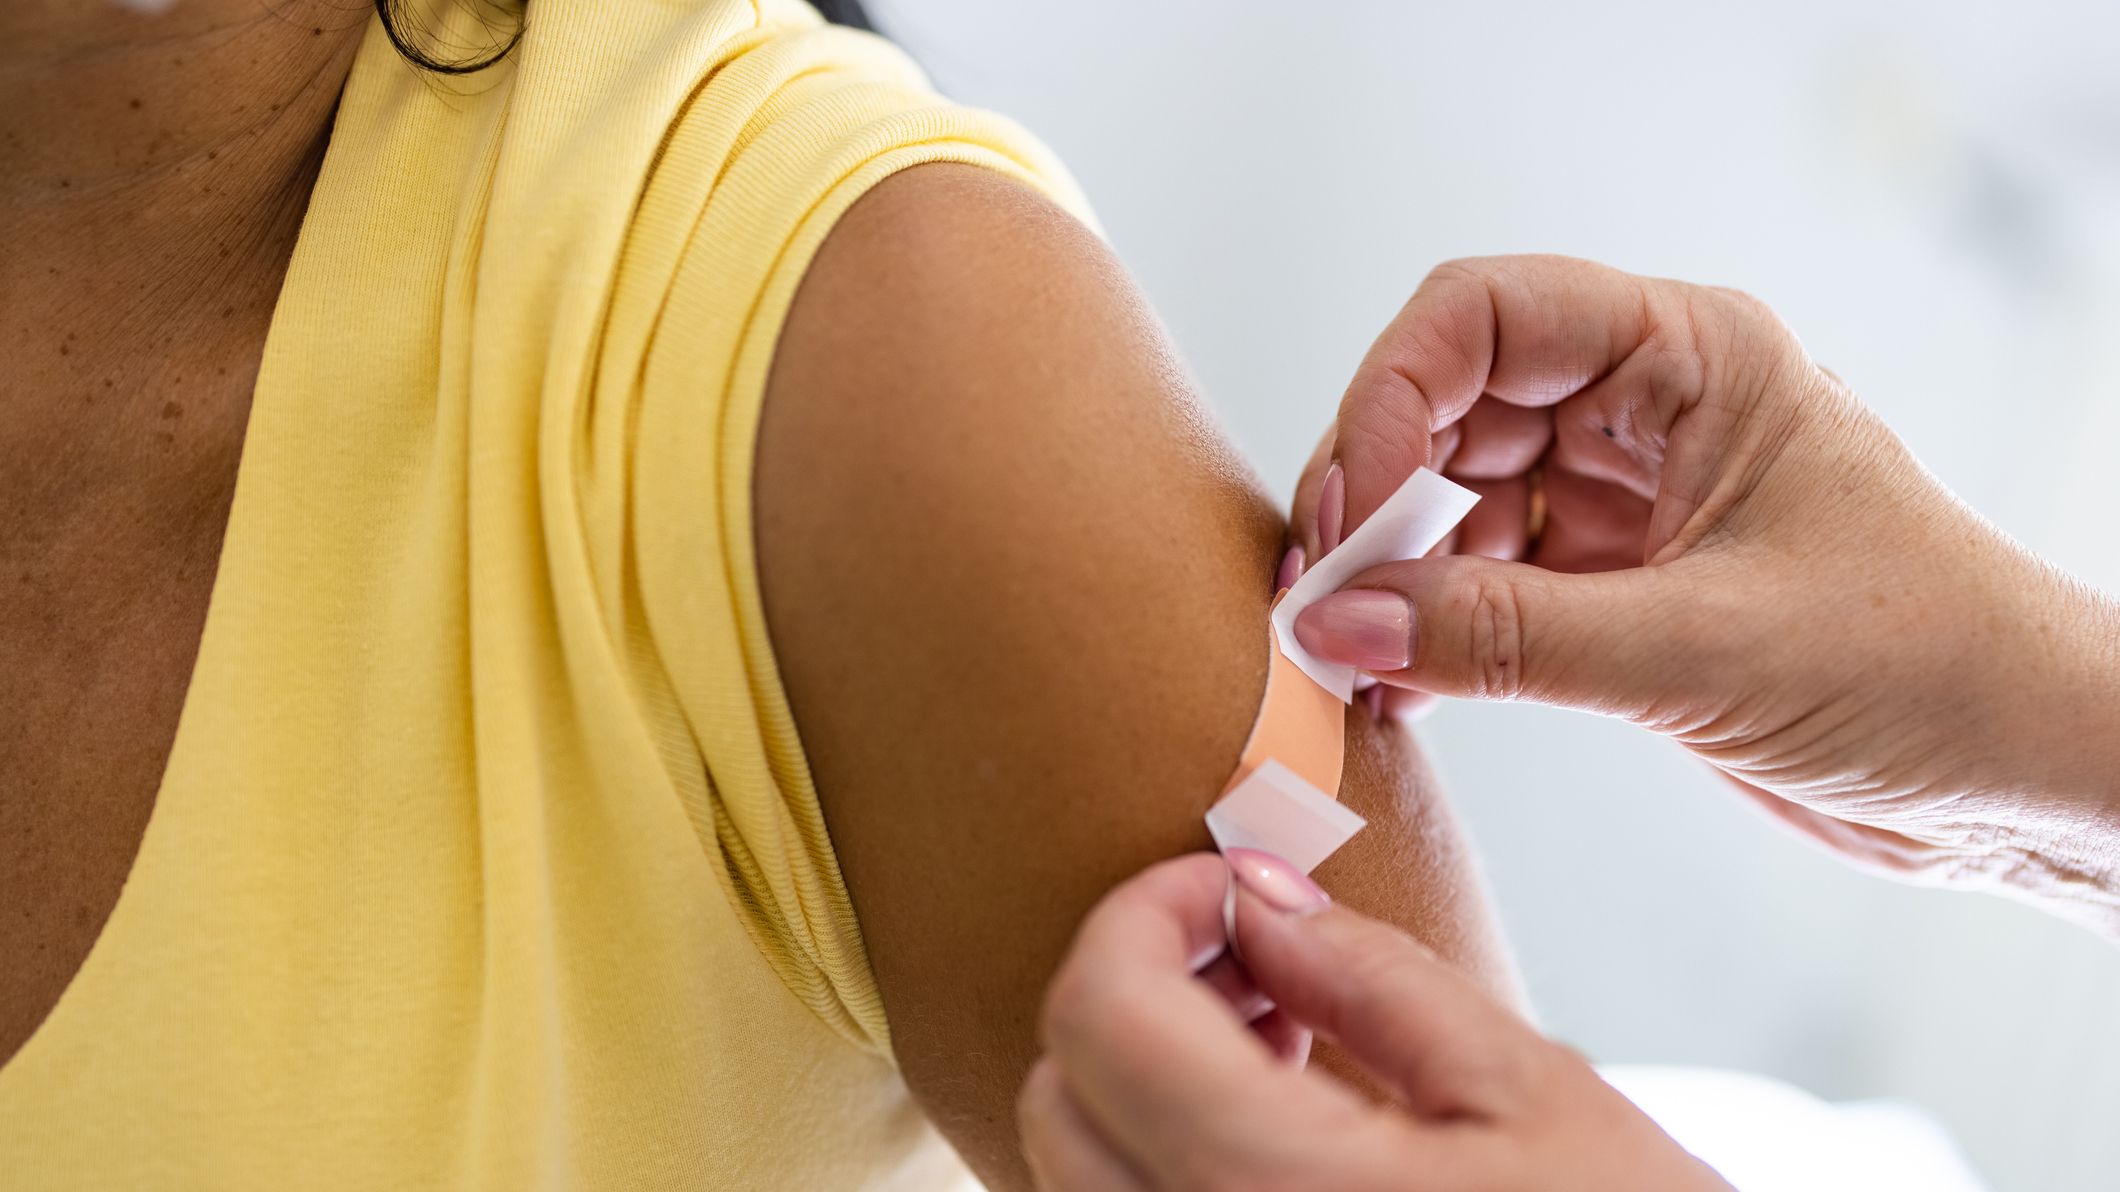 What Are the Side Effects of the 2023 COVID Vaccine? Experts Weigh In